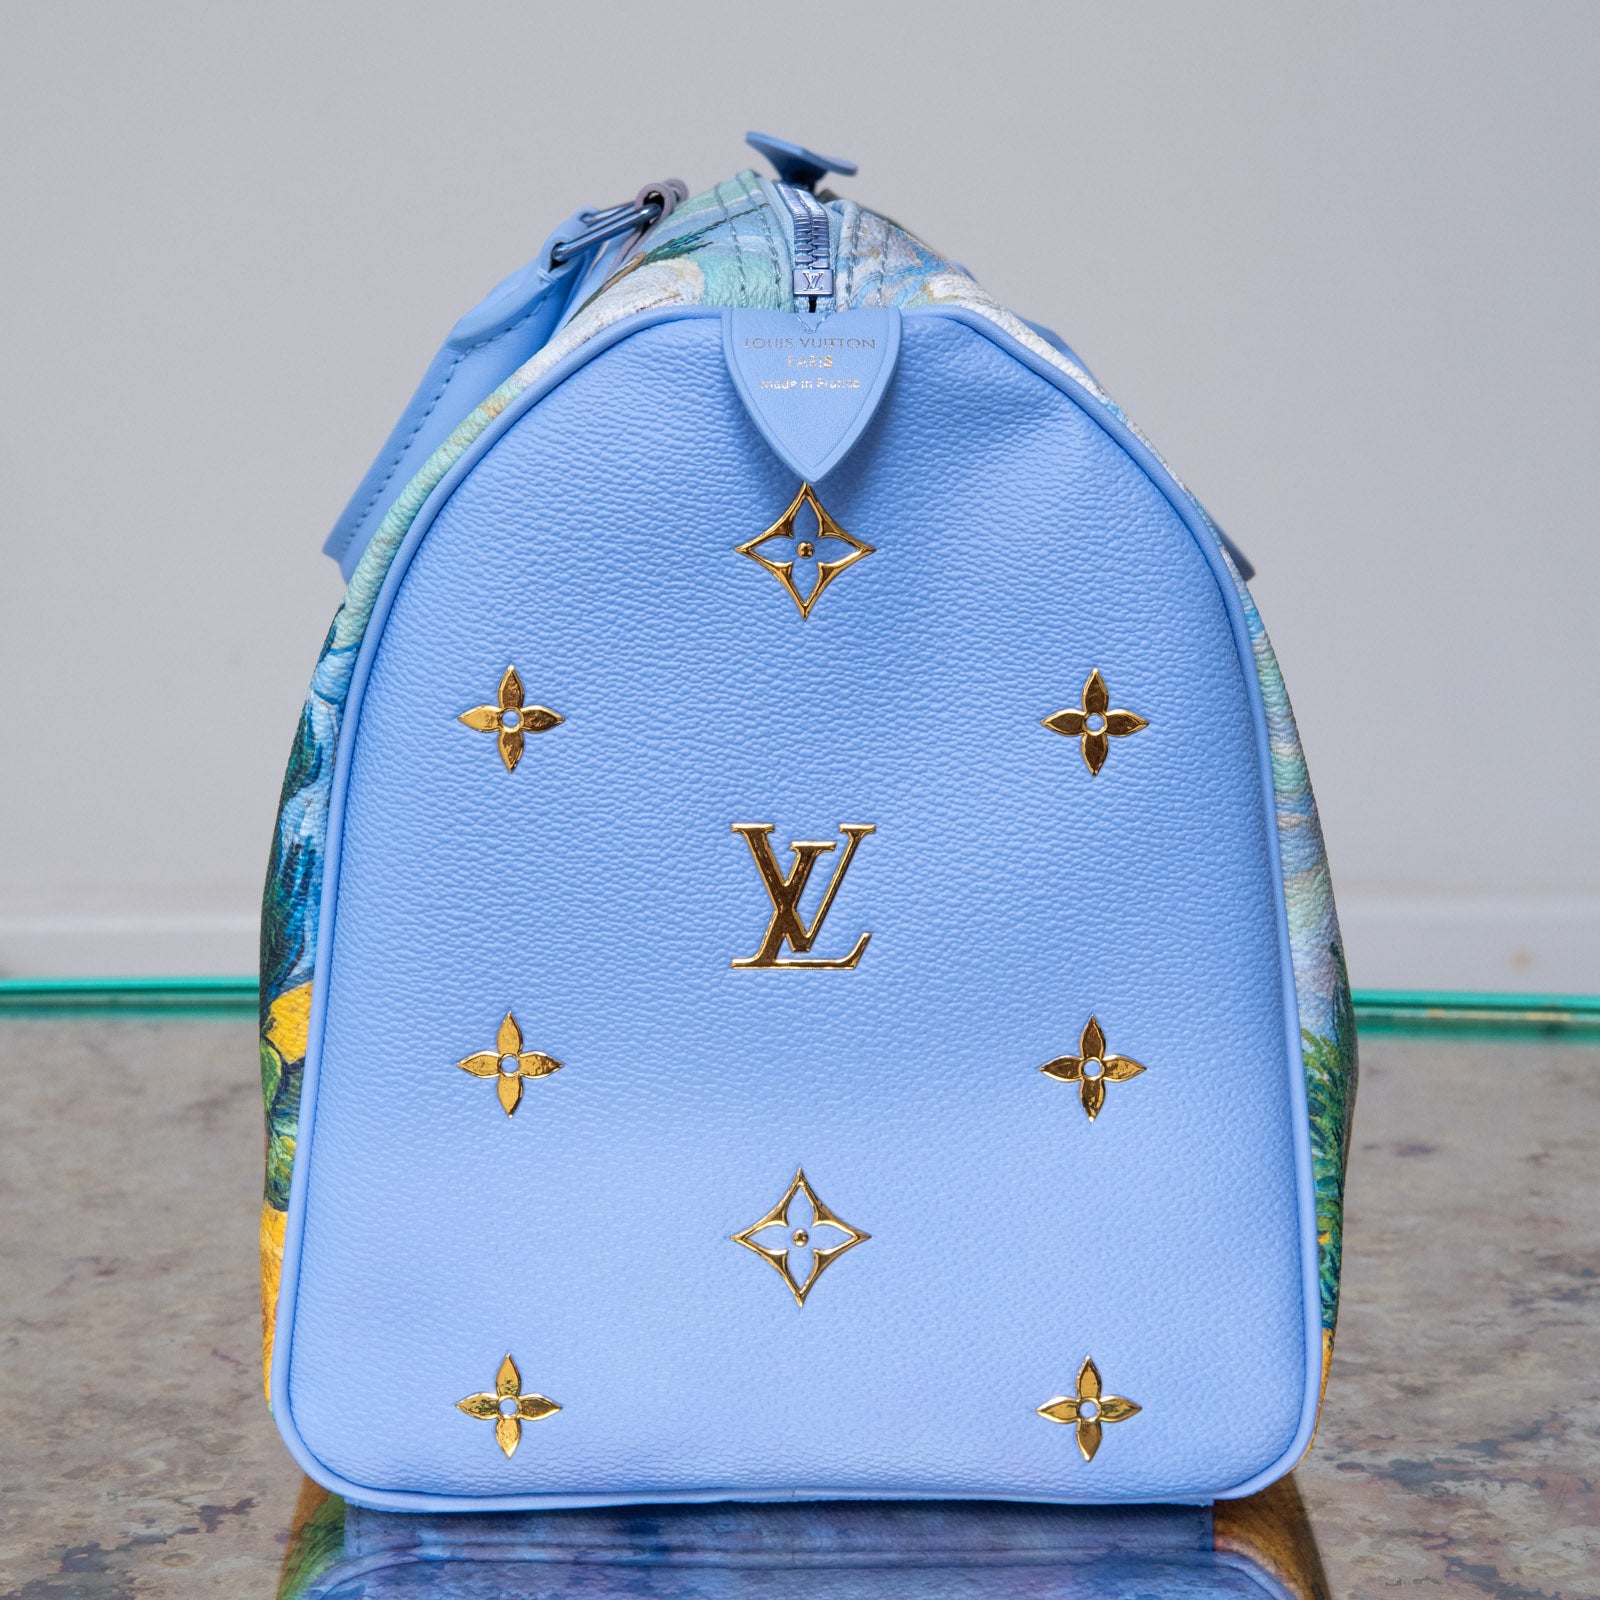 Louis Vuitton Limited Edition Lavender Speedy 30 Jeff Koons Van Gogh Masters Collection - Image 4 of 18